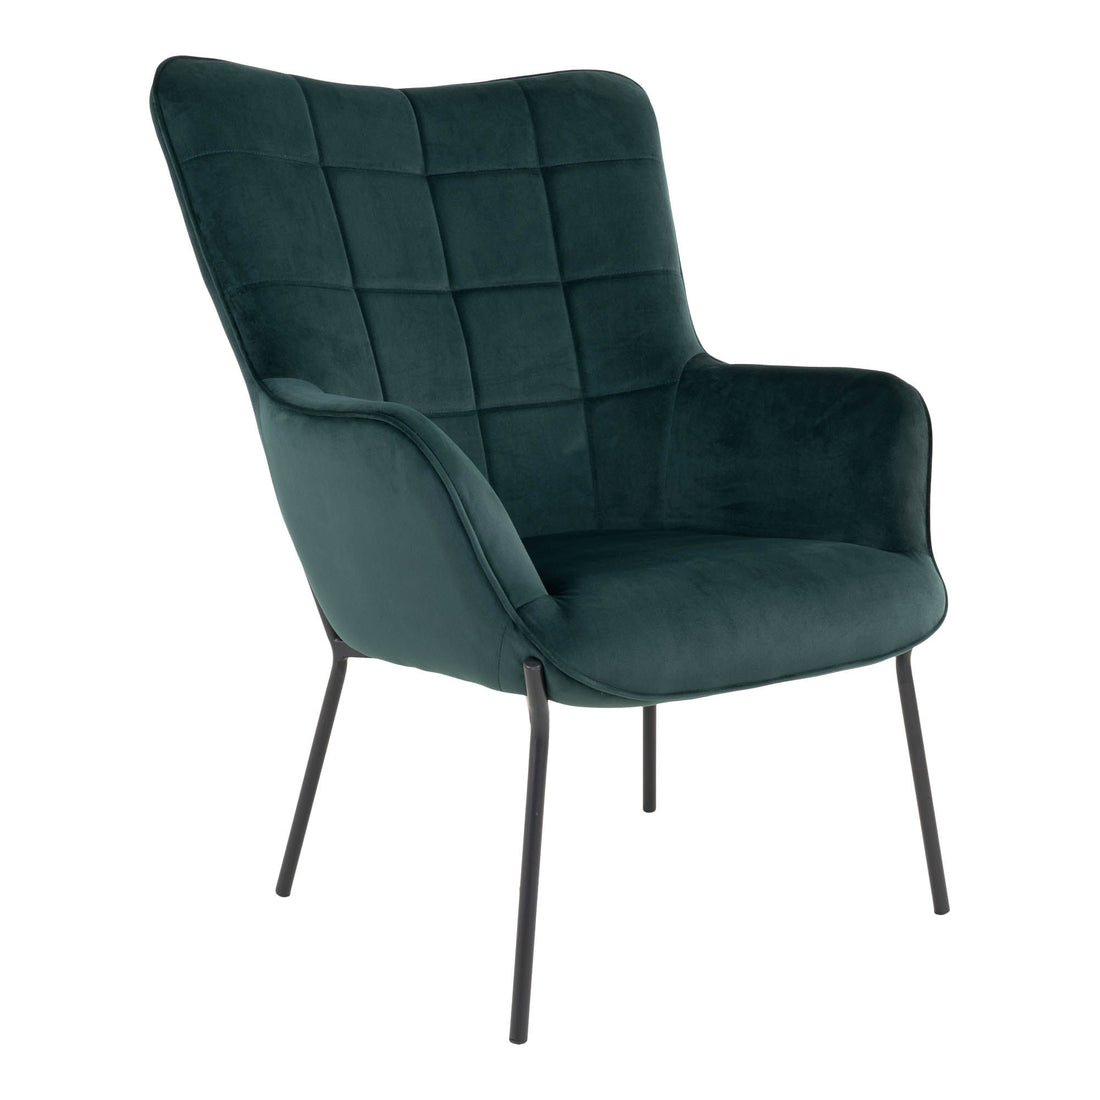 Glasgow chair - chair in green velor with black legs - 1 - pcs